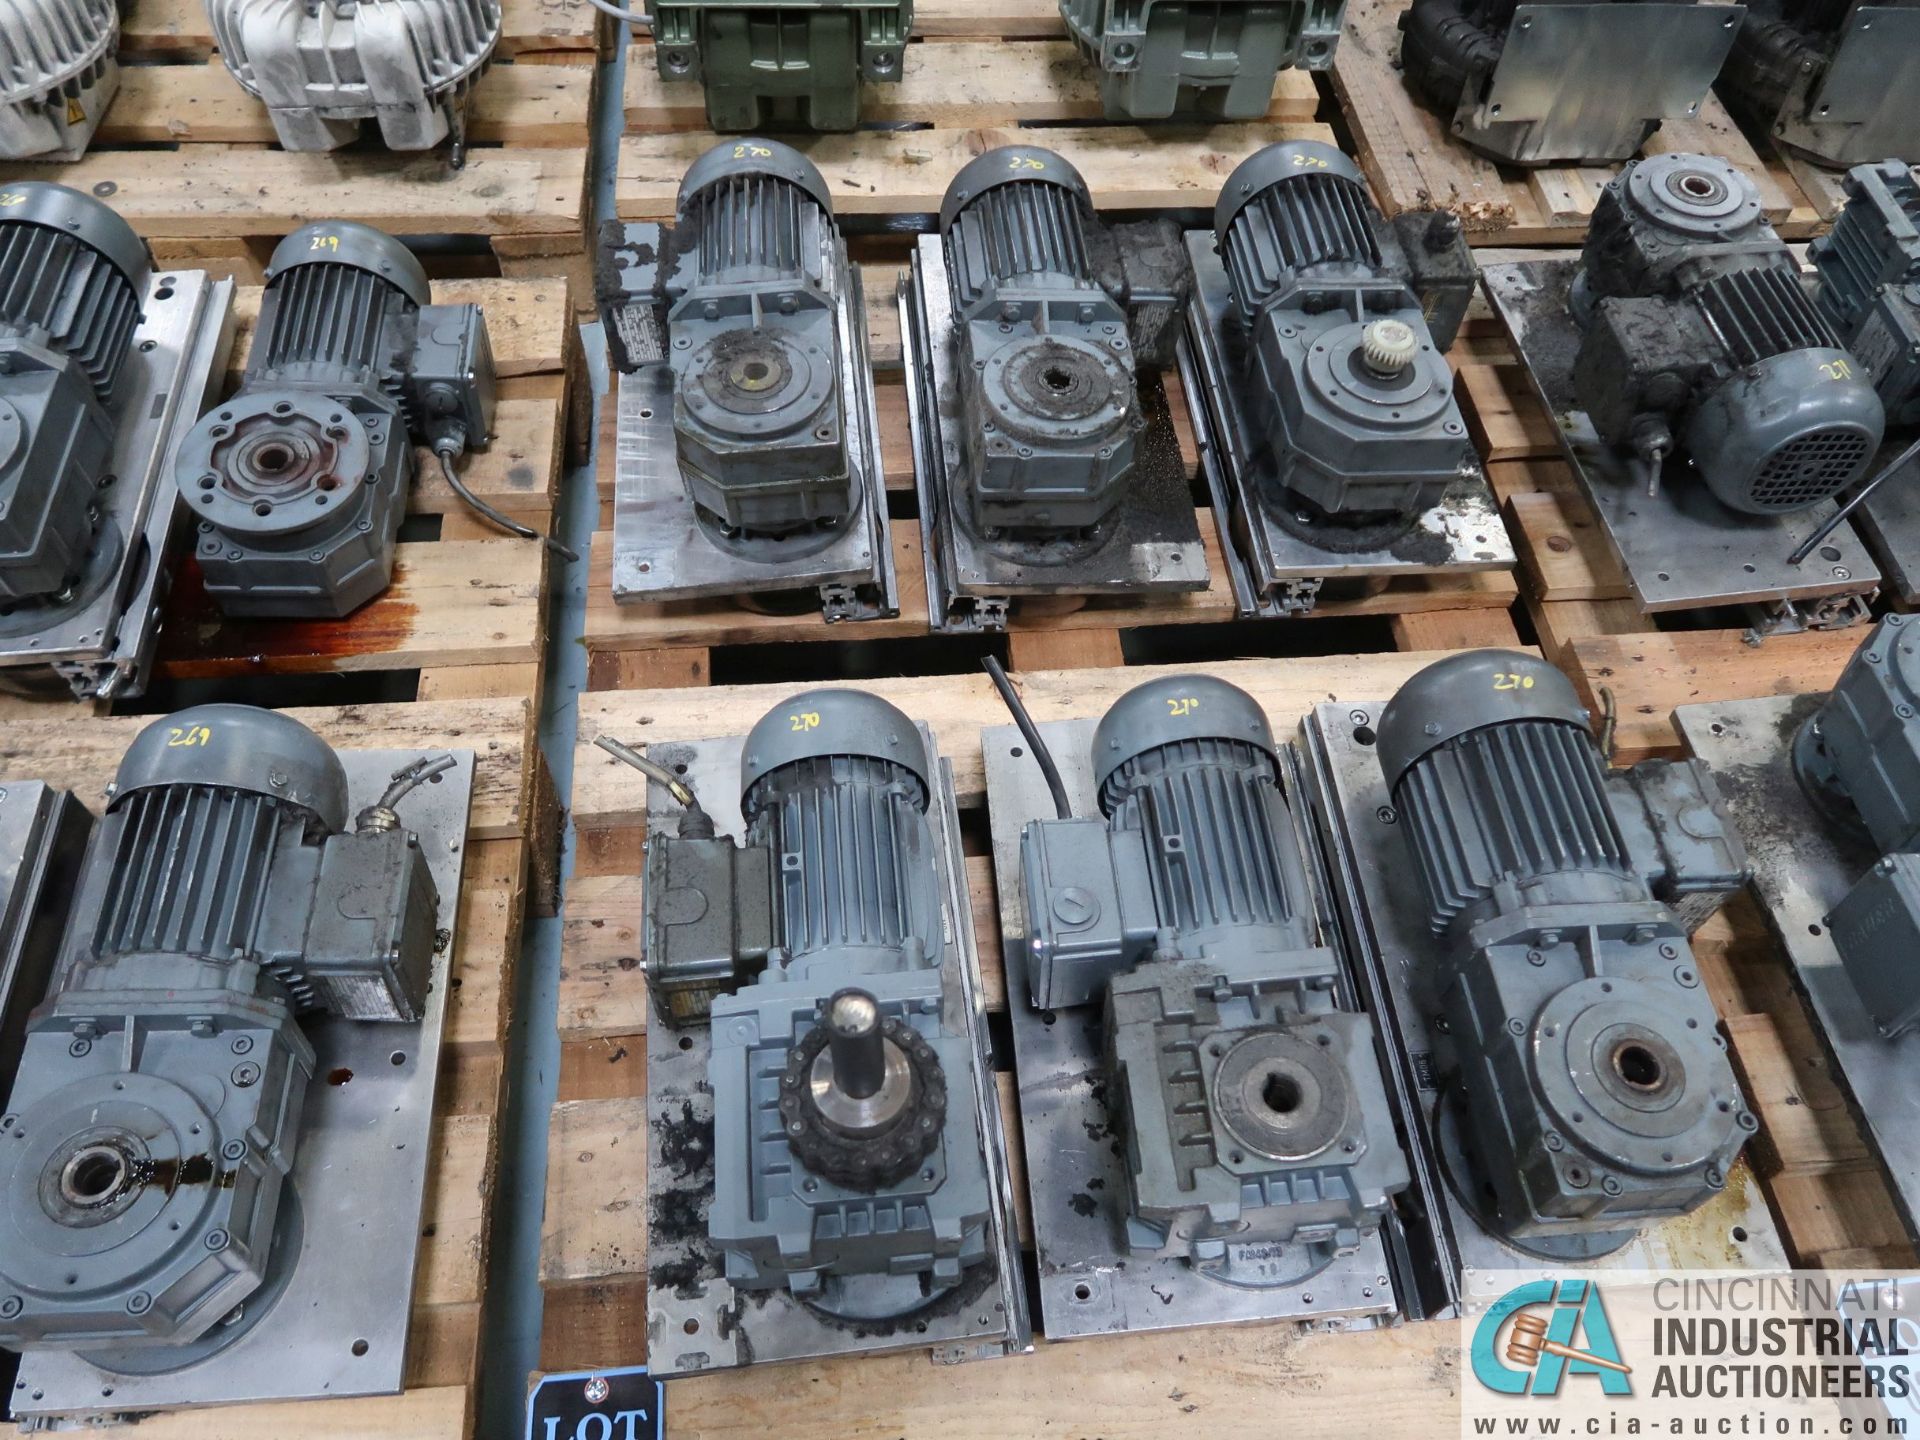 1.0 HP APPROX. DRIVE MOTORS *$25.00 RIGGING FEE DUE TO INDUSTRIAL SERVICES AND SALES*